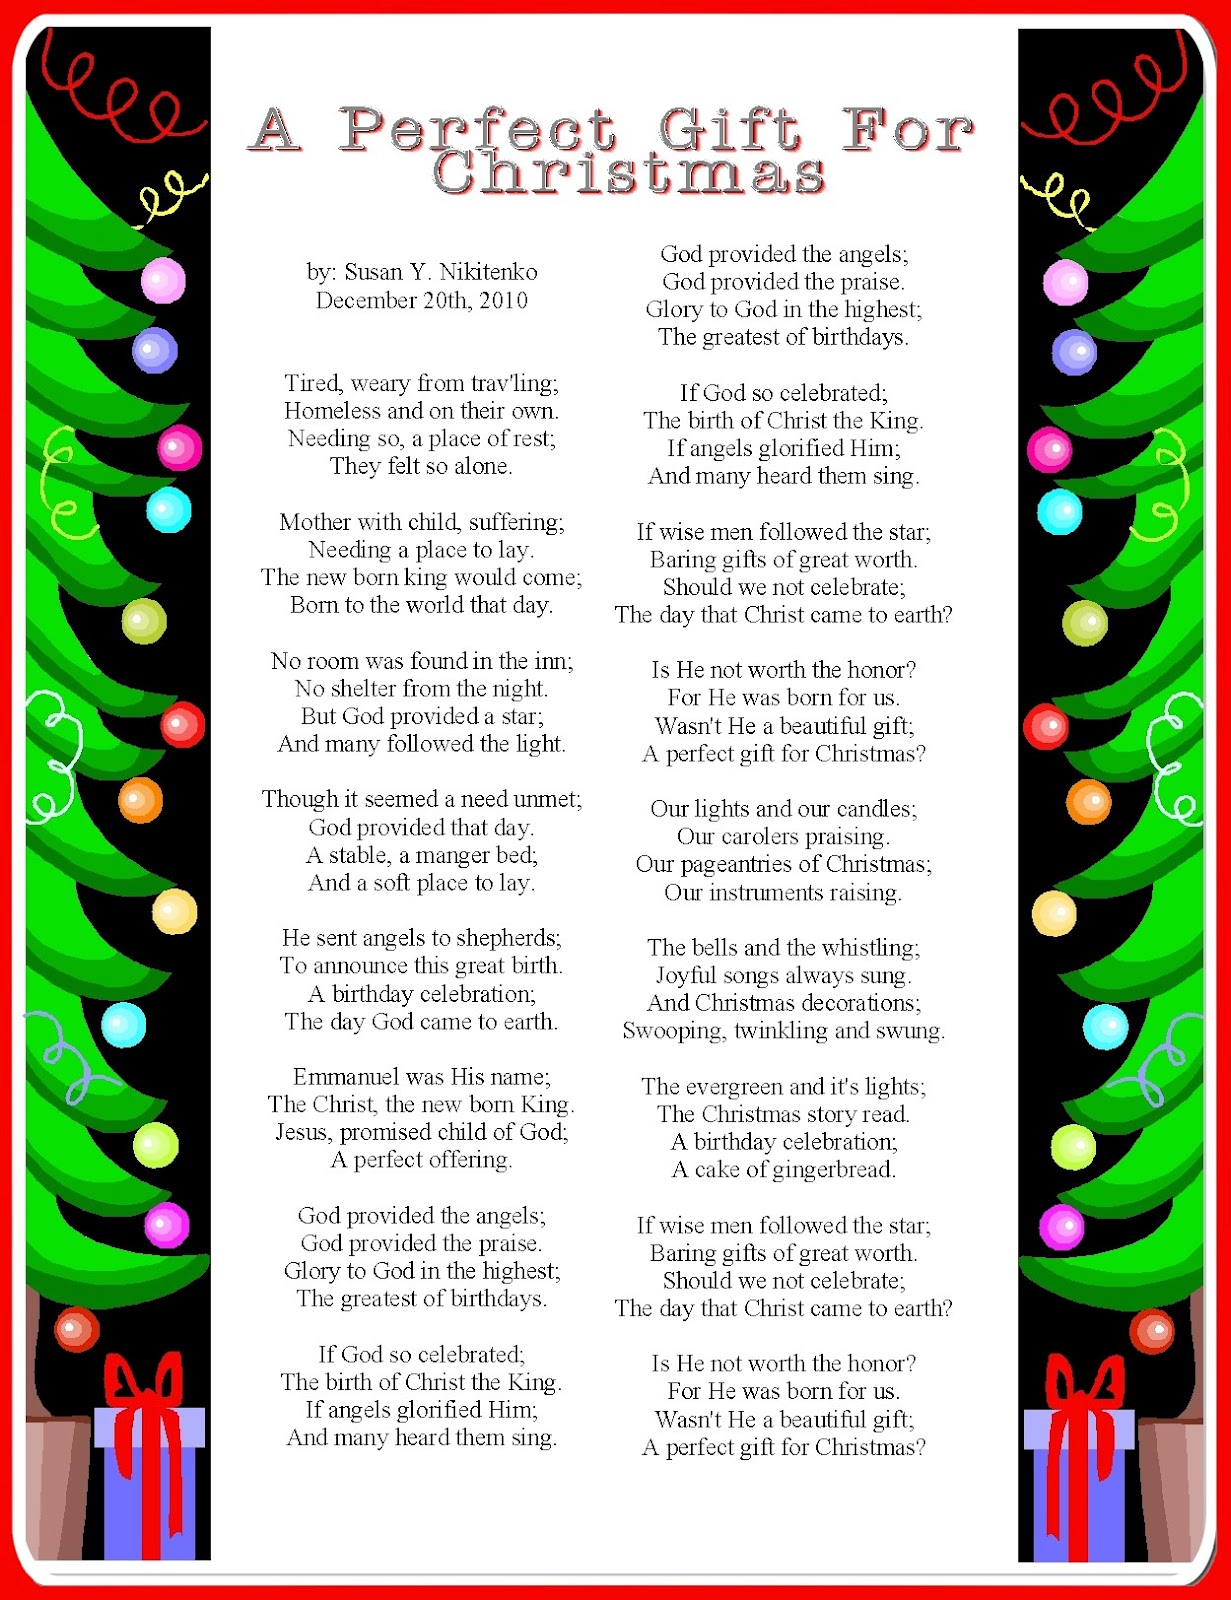 Christian Images In My Treasure Box: Christmas Poem Poster